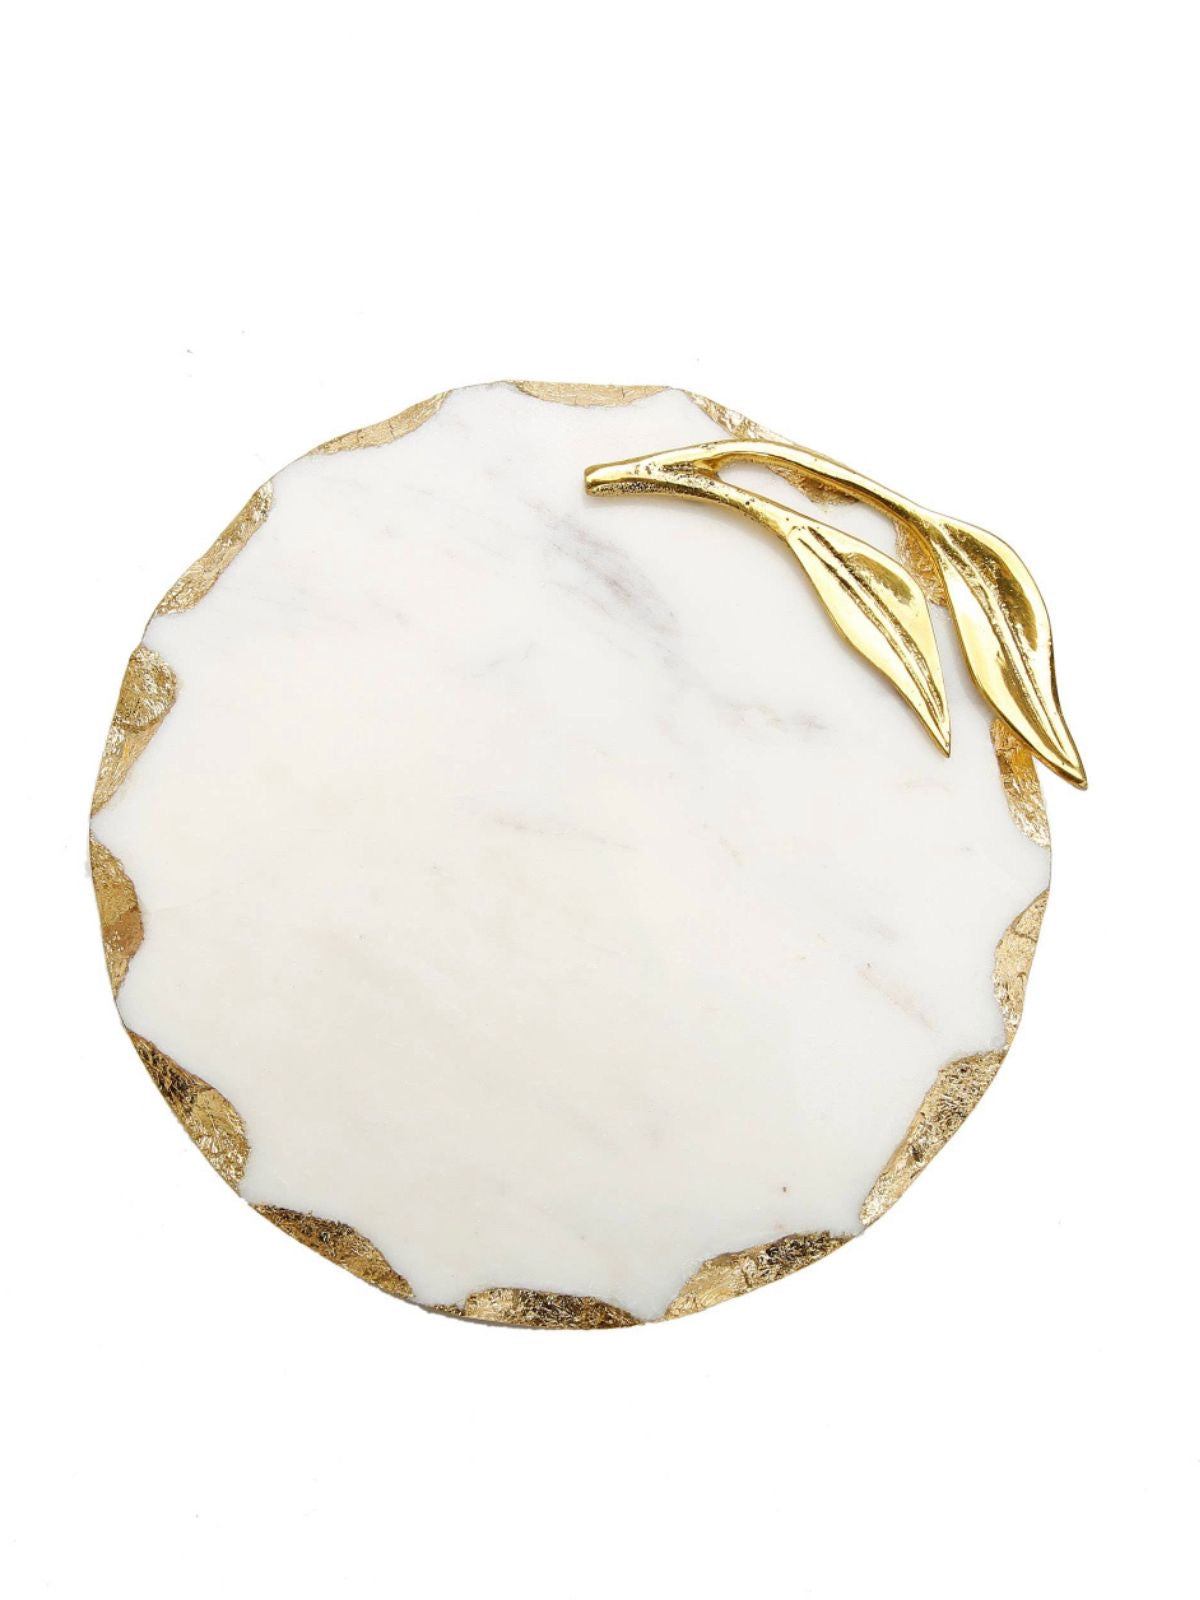 This 6D marble trivet is decorated with a magnificent gold leaf design perfect to place a candle on or use it as a coaster. Sold by KYA Home Decor 